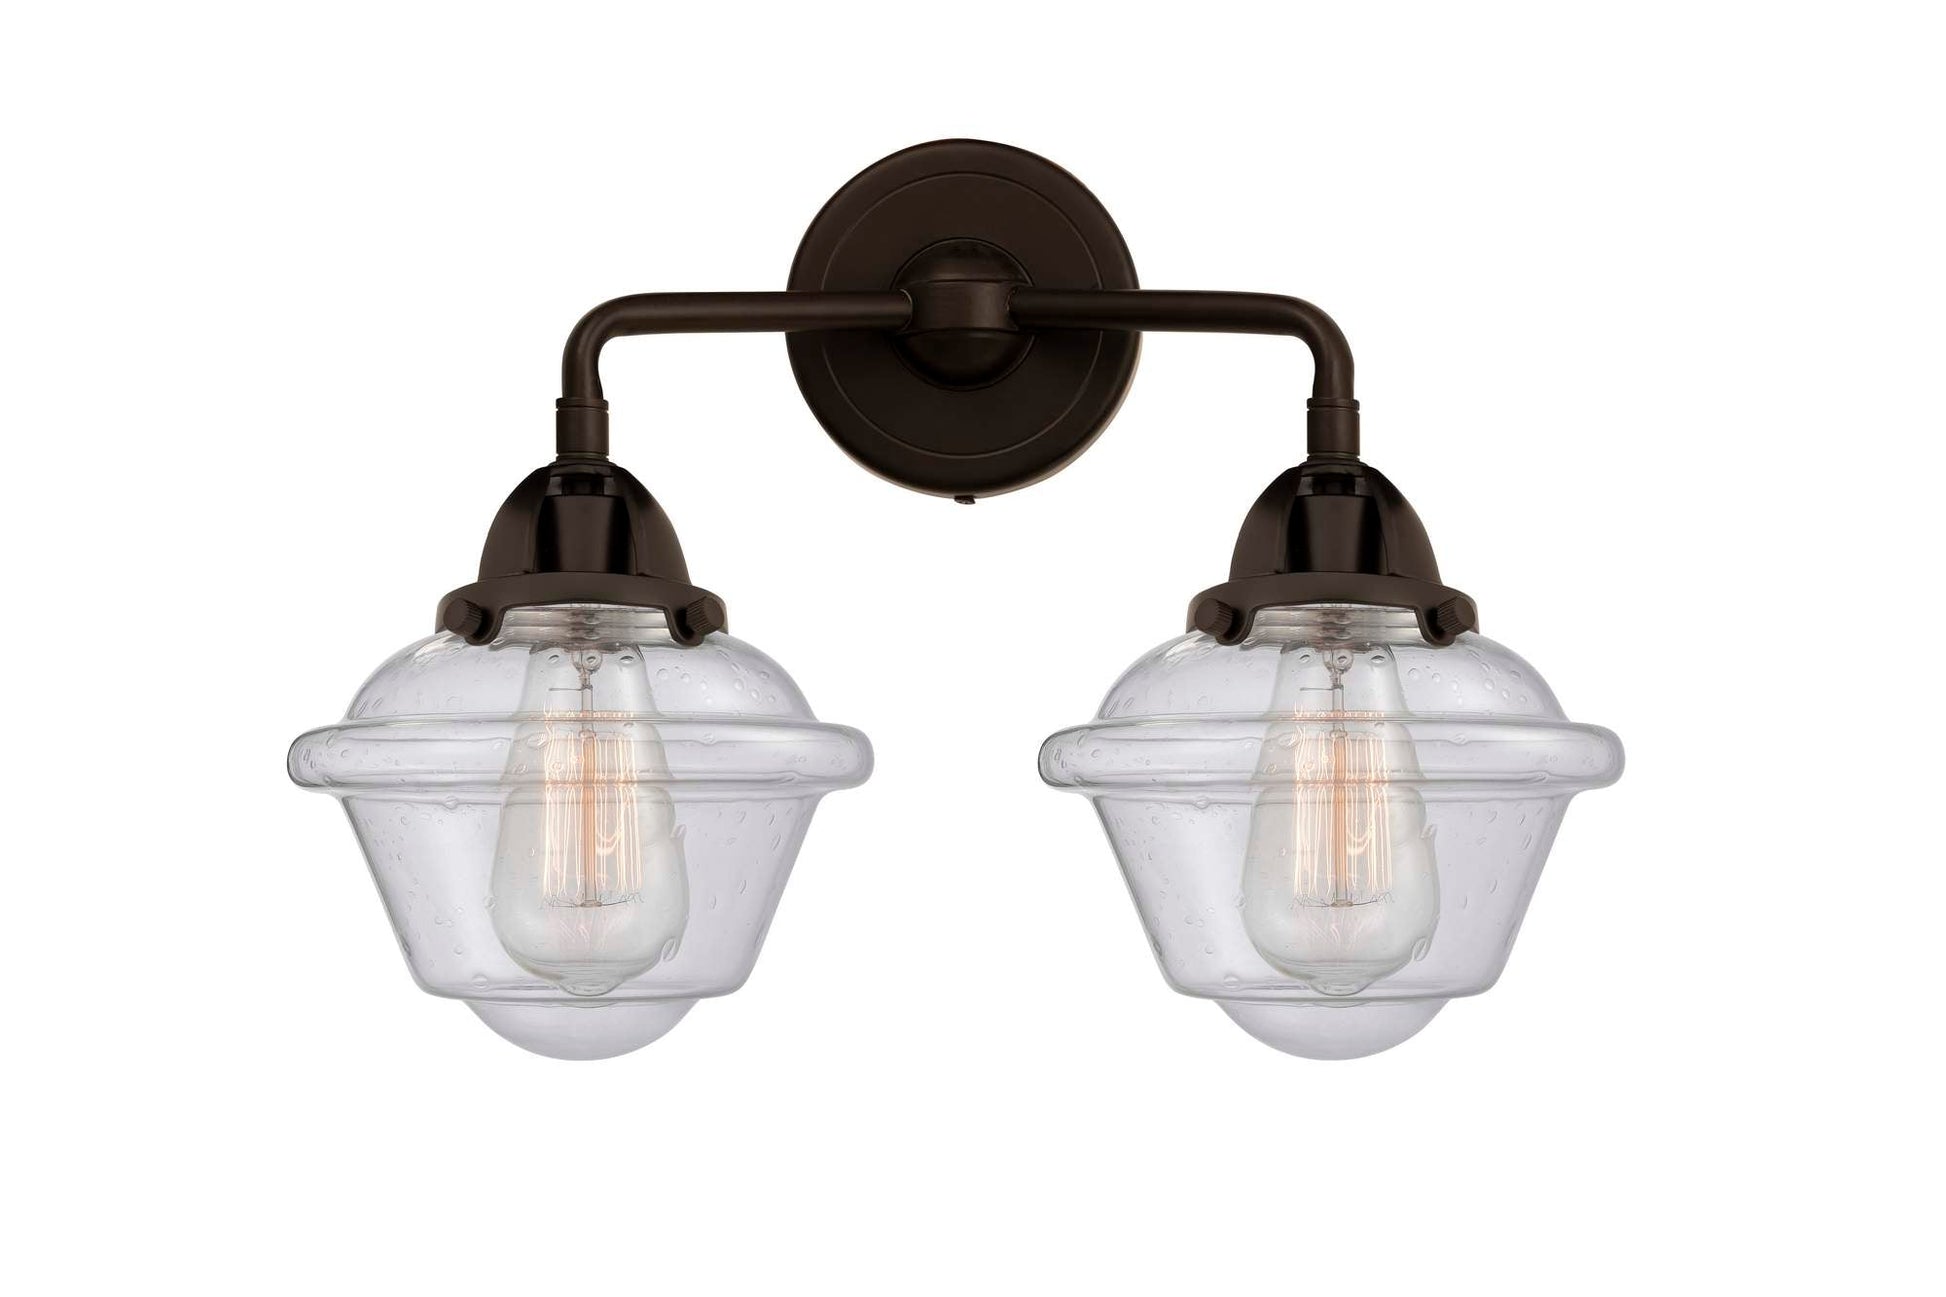 288-2W-OB-G534 2-Light 15.5" Oil Rubbed Bronze Bath Vanity Light - Seedy Small Oxford Glass - LED Bulb - Dimmensions: 15.5 x 8 x 12.125 - Glass Up or Down: Yes